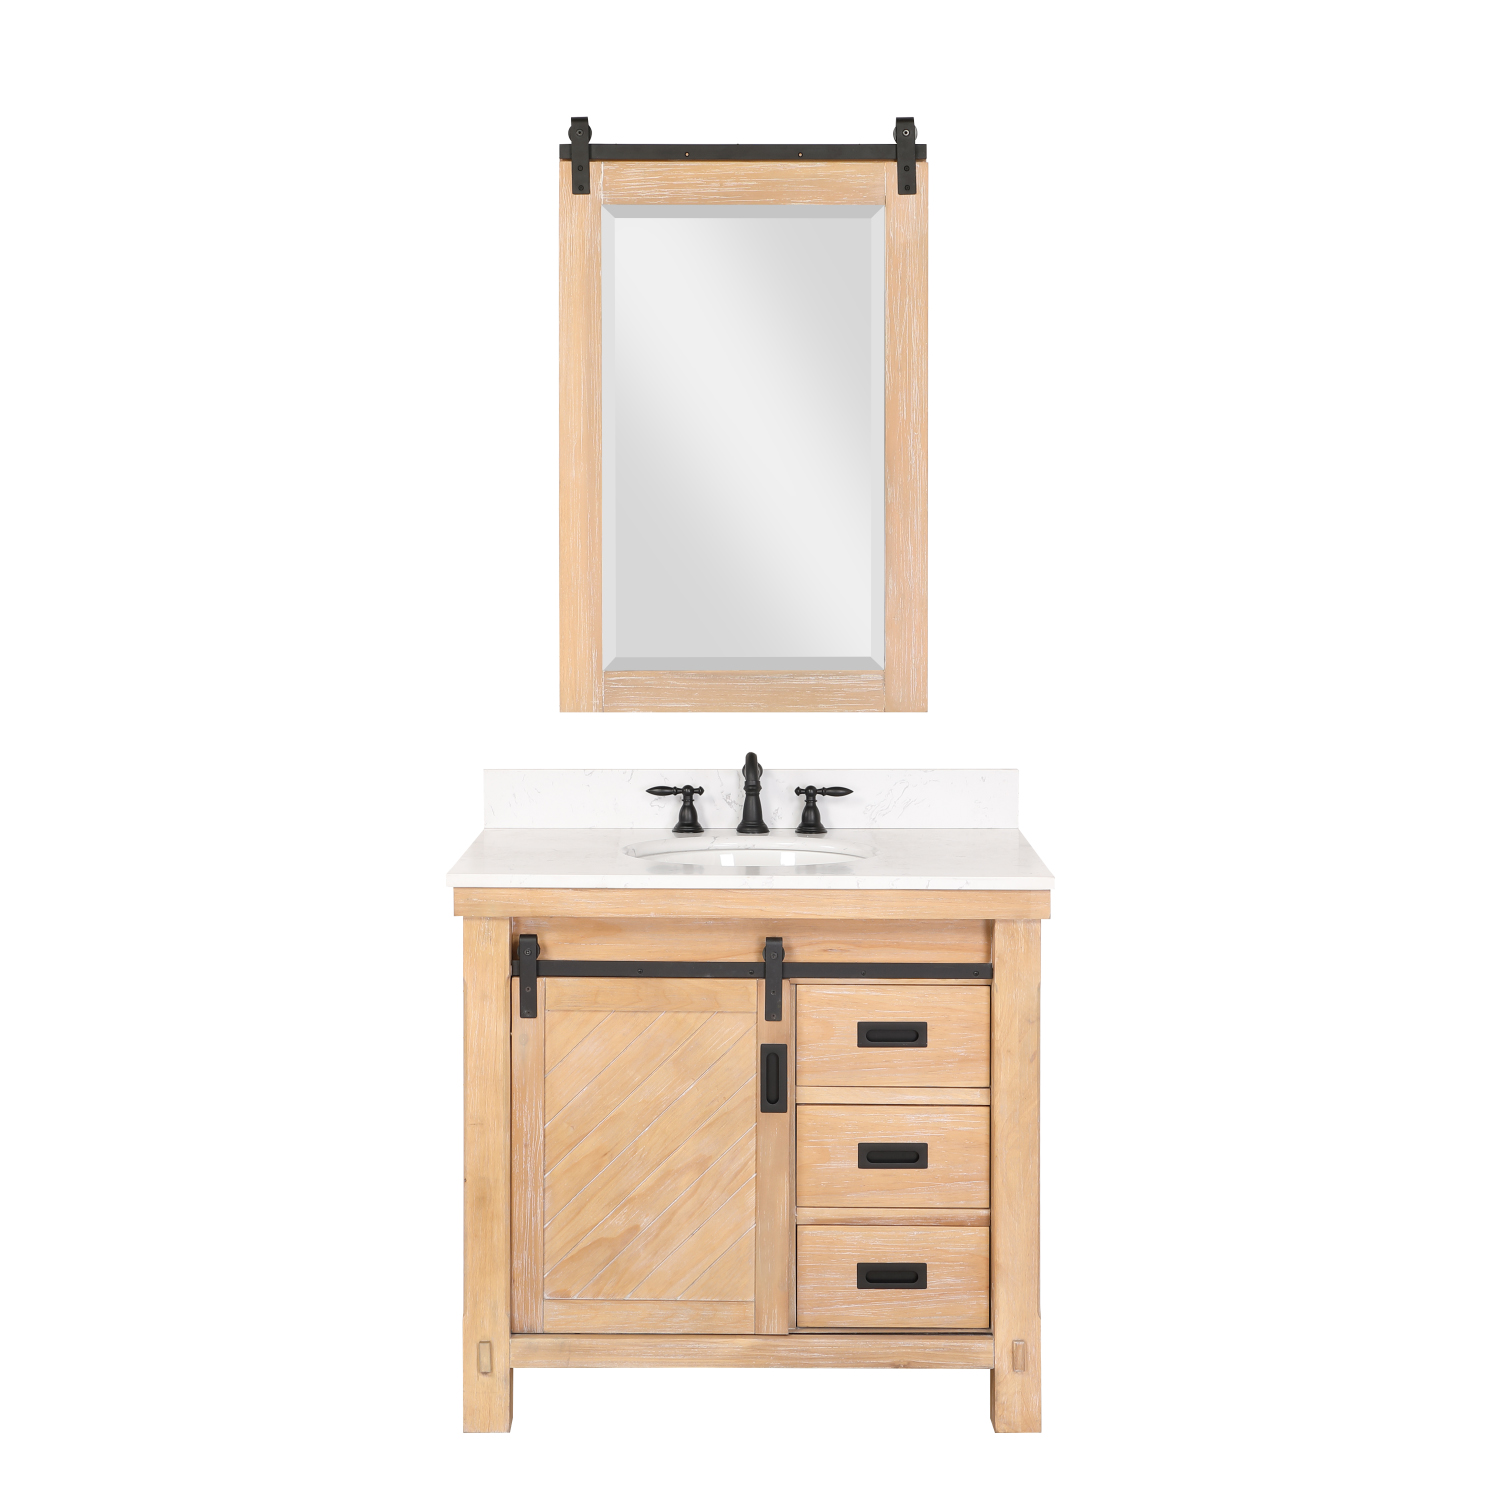 36" Single Sink Bath Vanity in Weathered Pine with White Composite Countertop